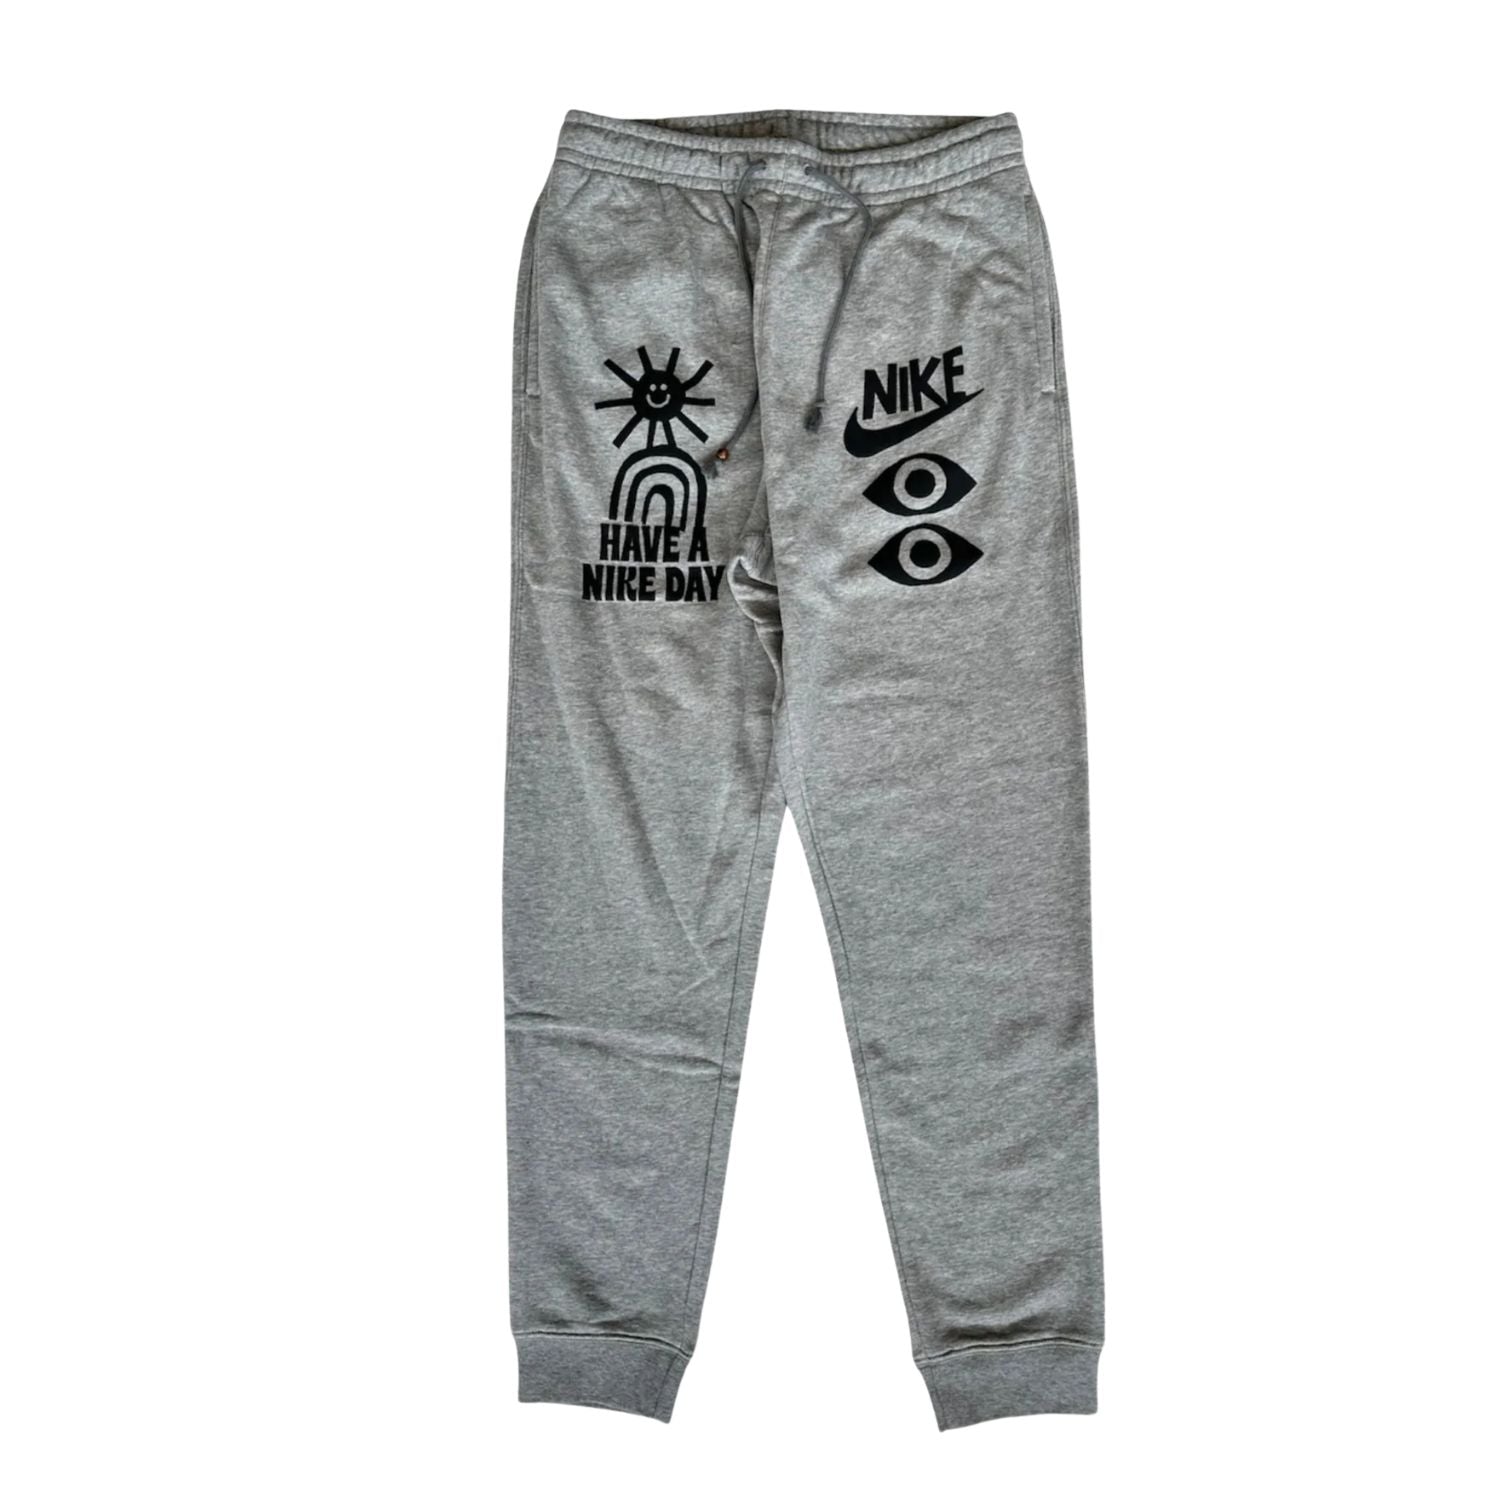 Nike Sportswear French Terry Pants Mens Style : Dq4173